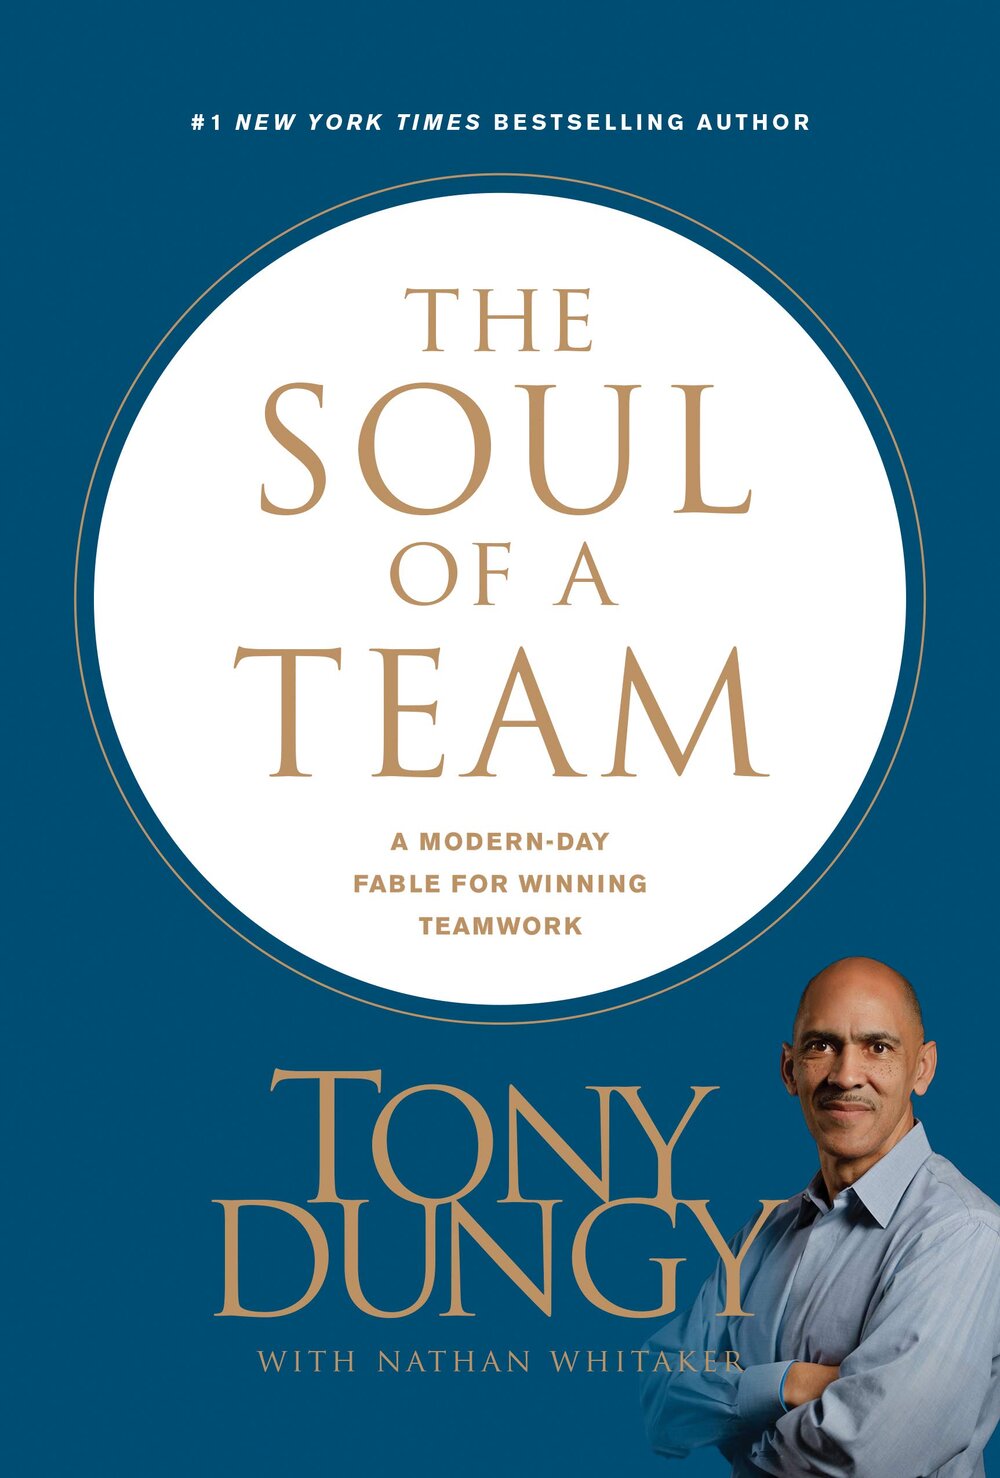 The Soul of a Team: A Modern-Day Fable for Winning Teamwork by Tony Dungy